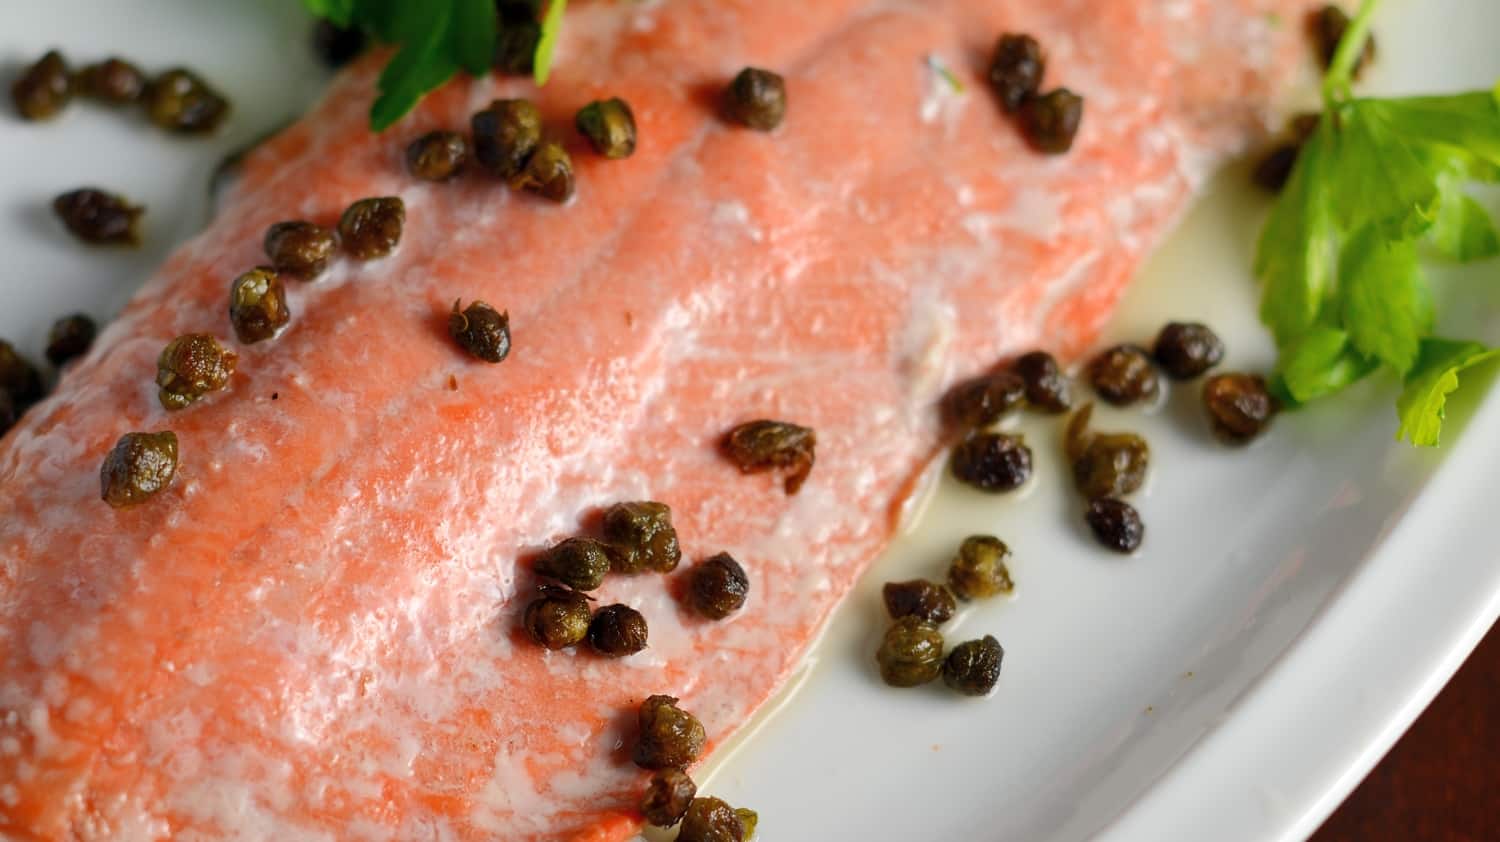 Crispy Caper Lemon Salmon is one of the best healthy salmon recipes. This lemon salmon is quick, easy and healthy! Crispy capers add texture sophistication to this easy weeknight meal.